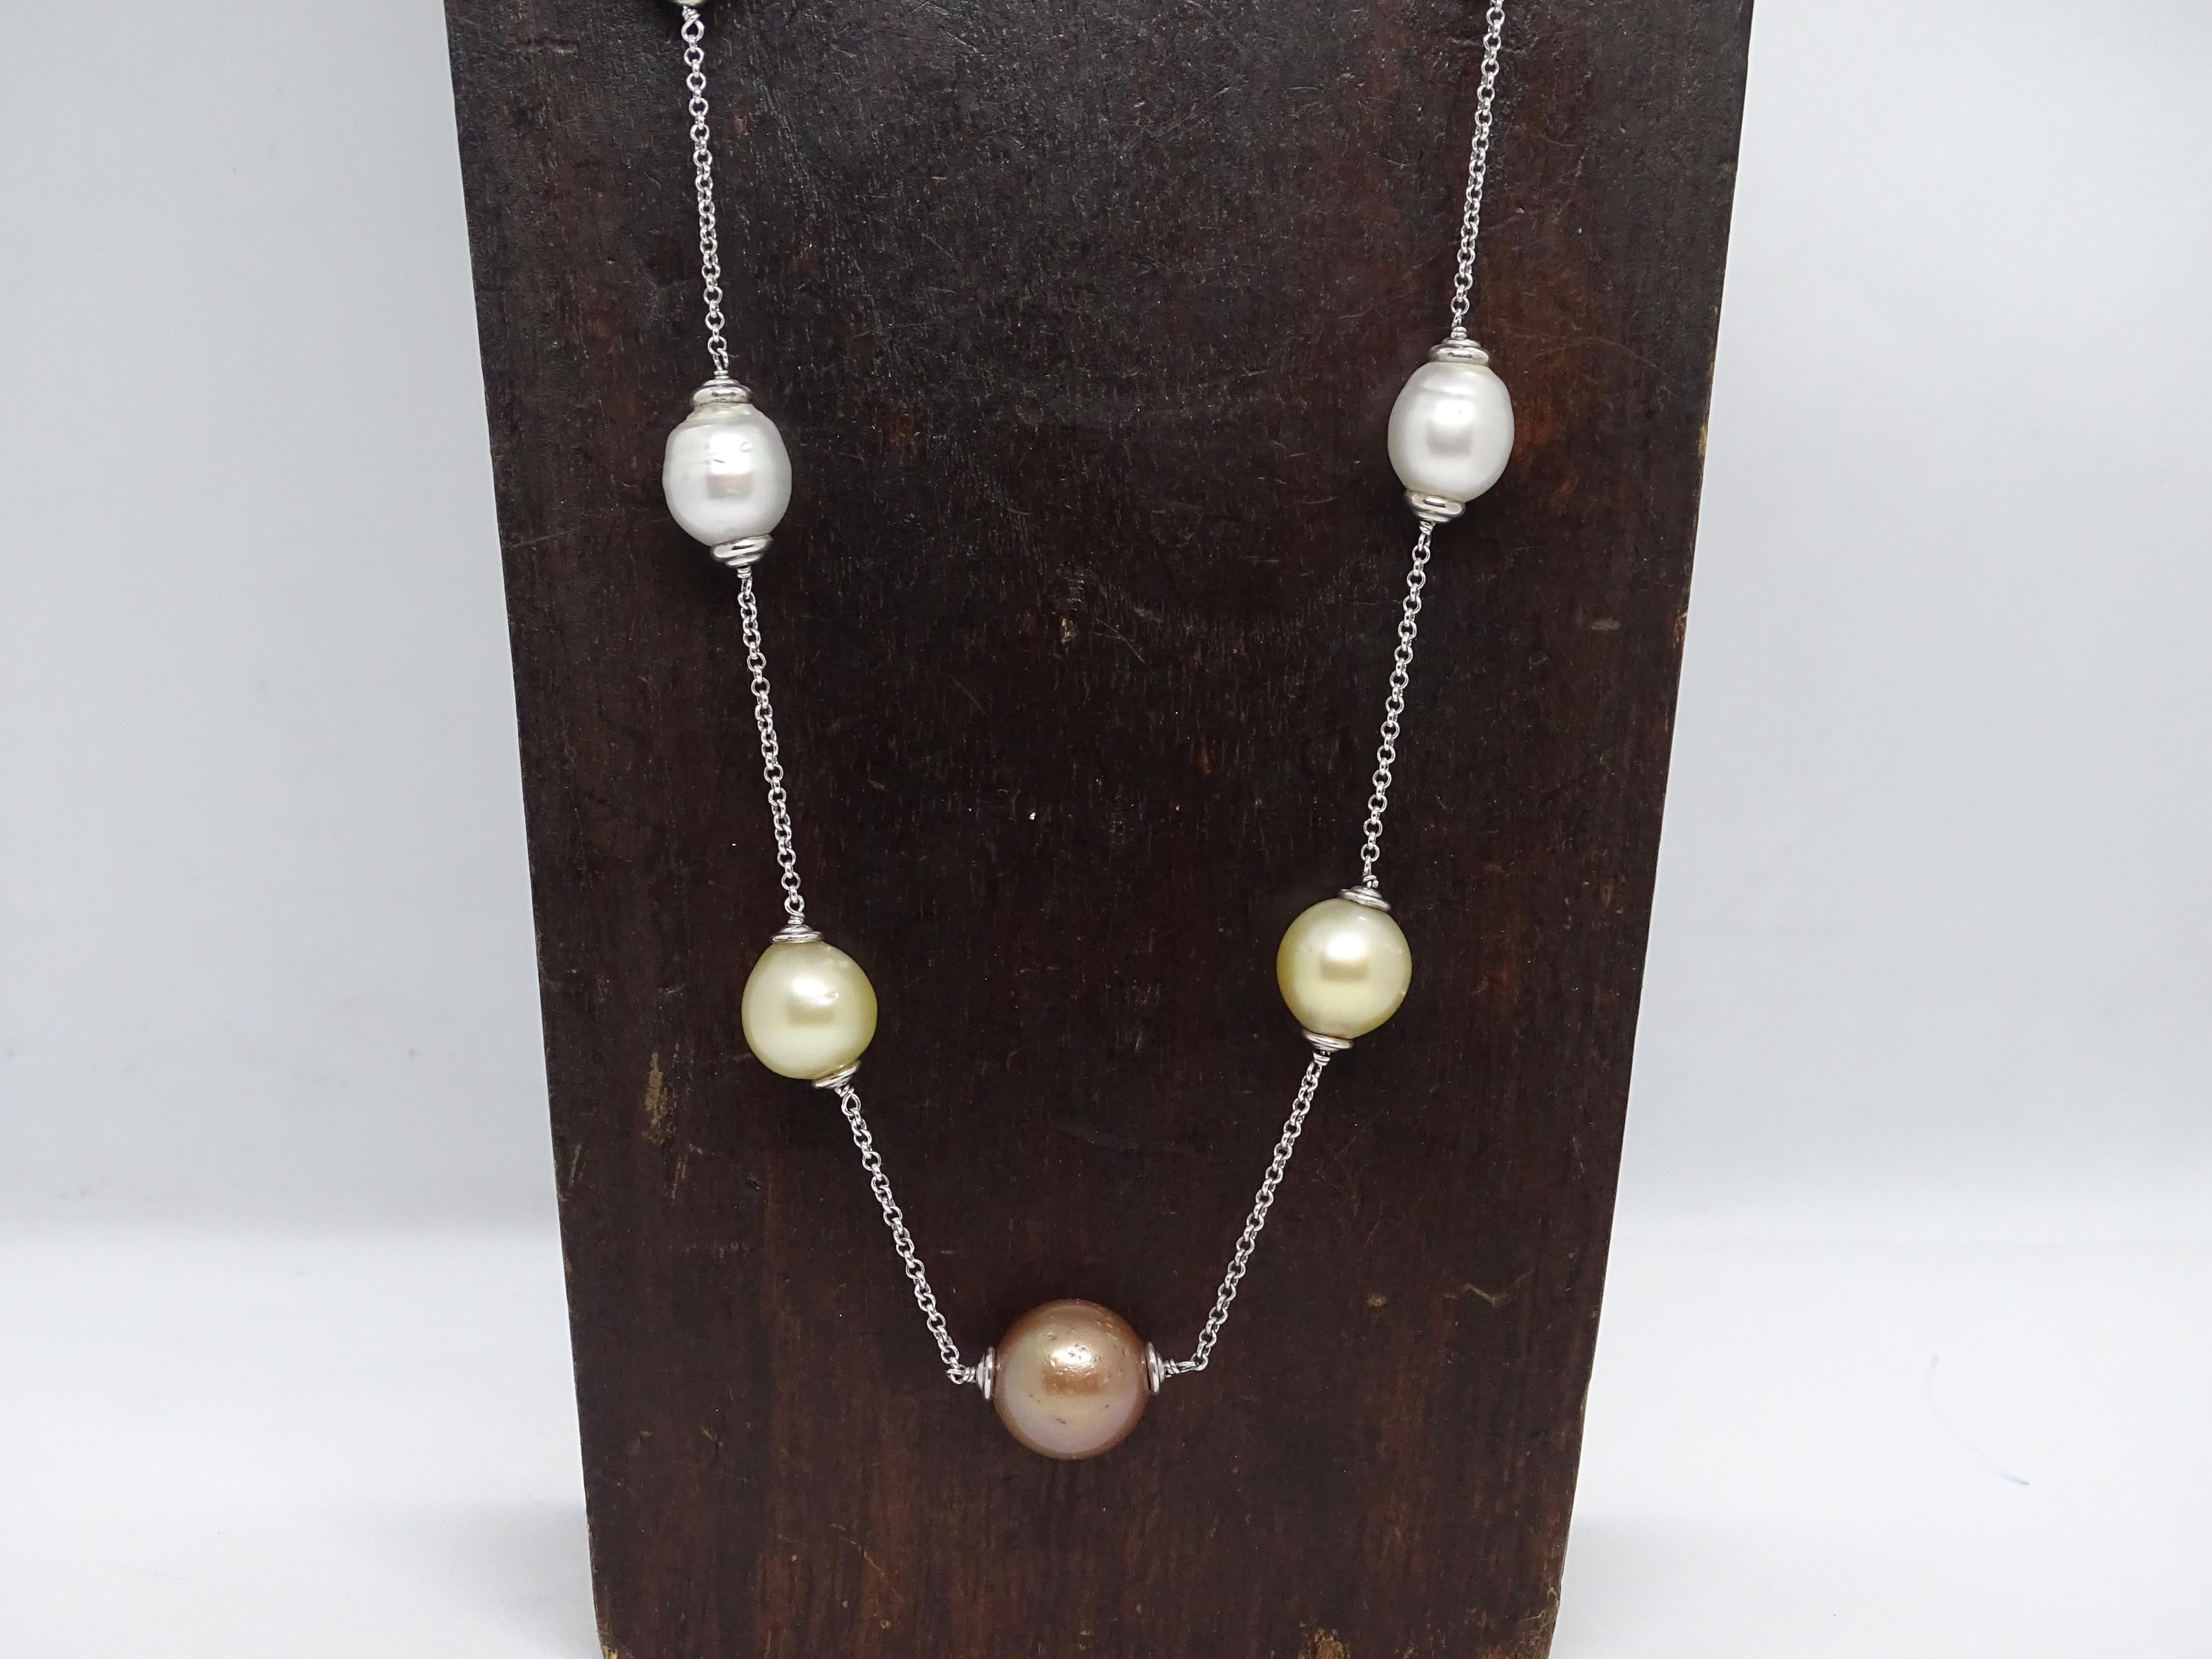 Australian, golden, tahitian and chocolate pearl necklace - white gold chain 3